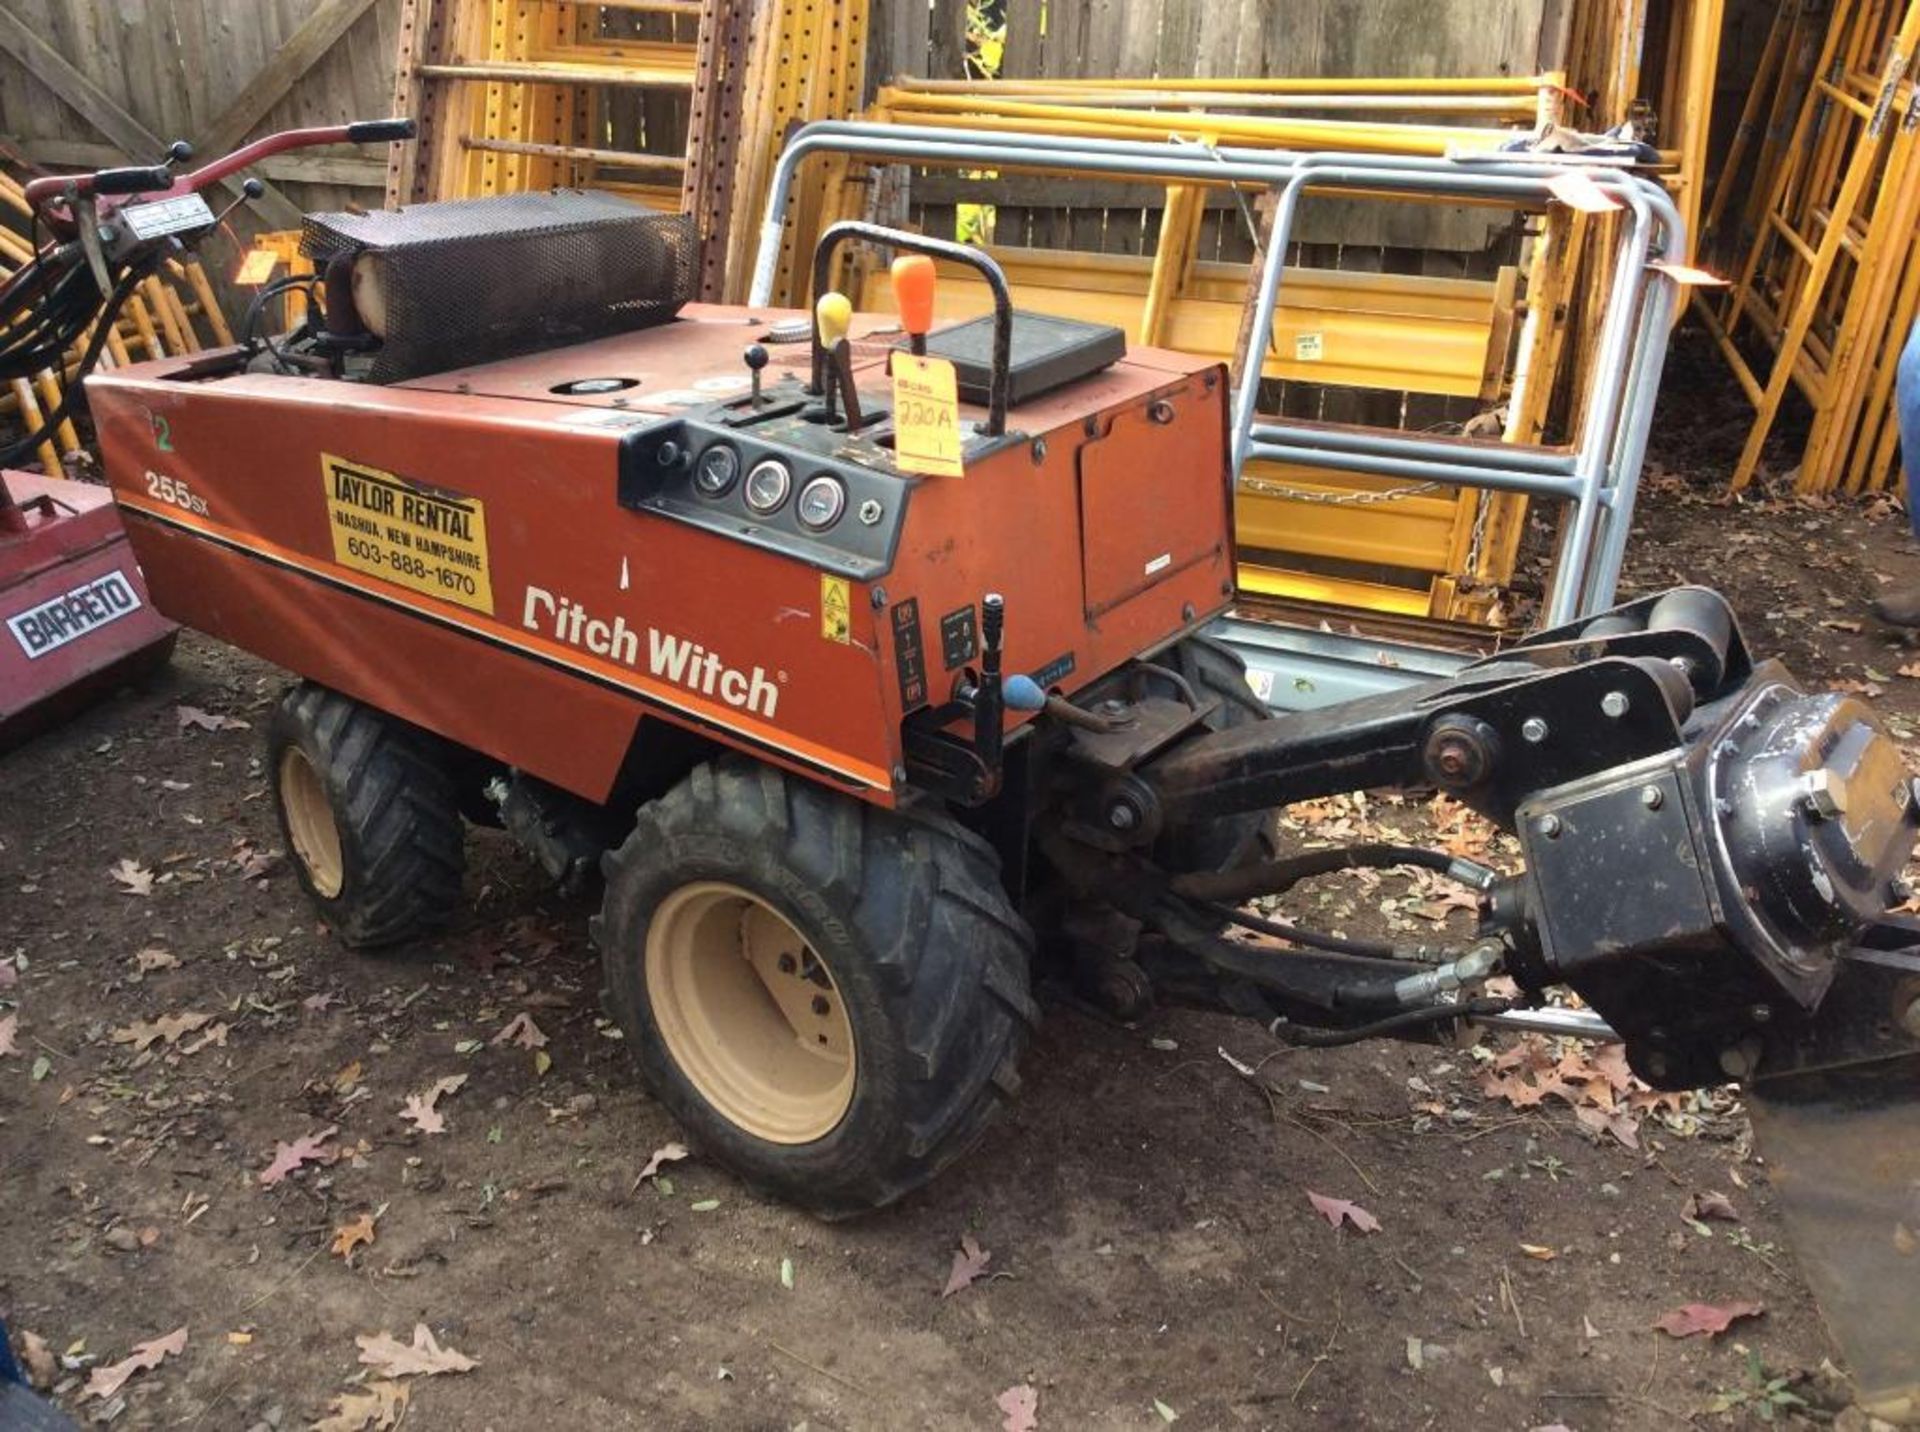 Ditch Witch m/n 255sx ditch/trench digger, 2-cylinder engine, reading 215 hours